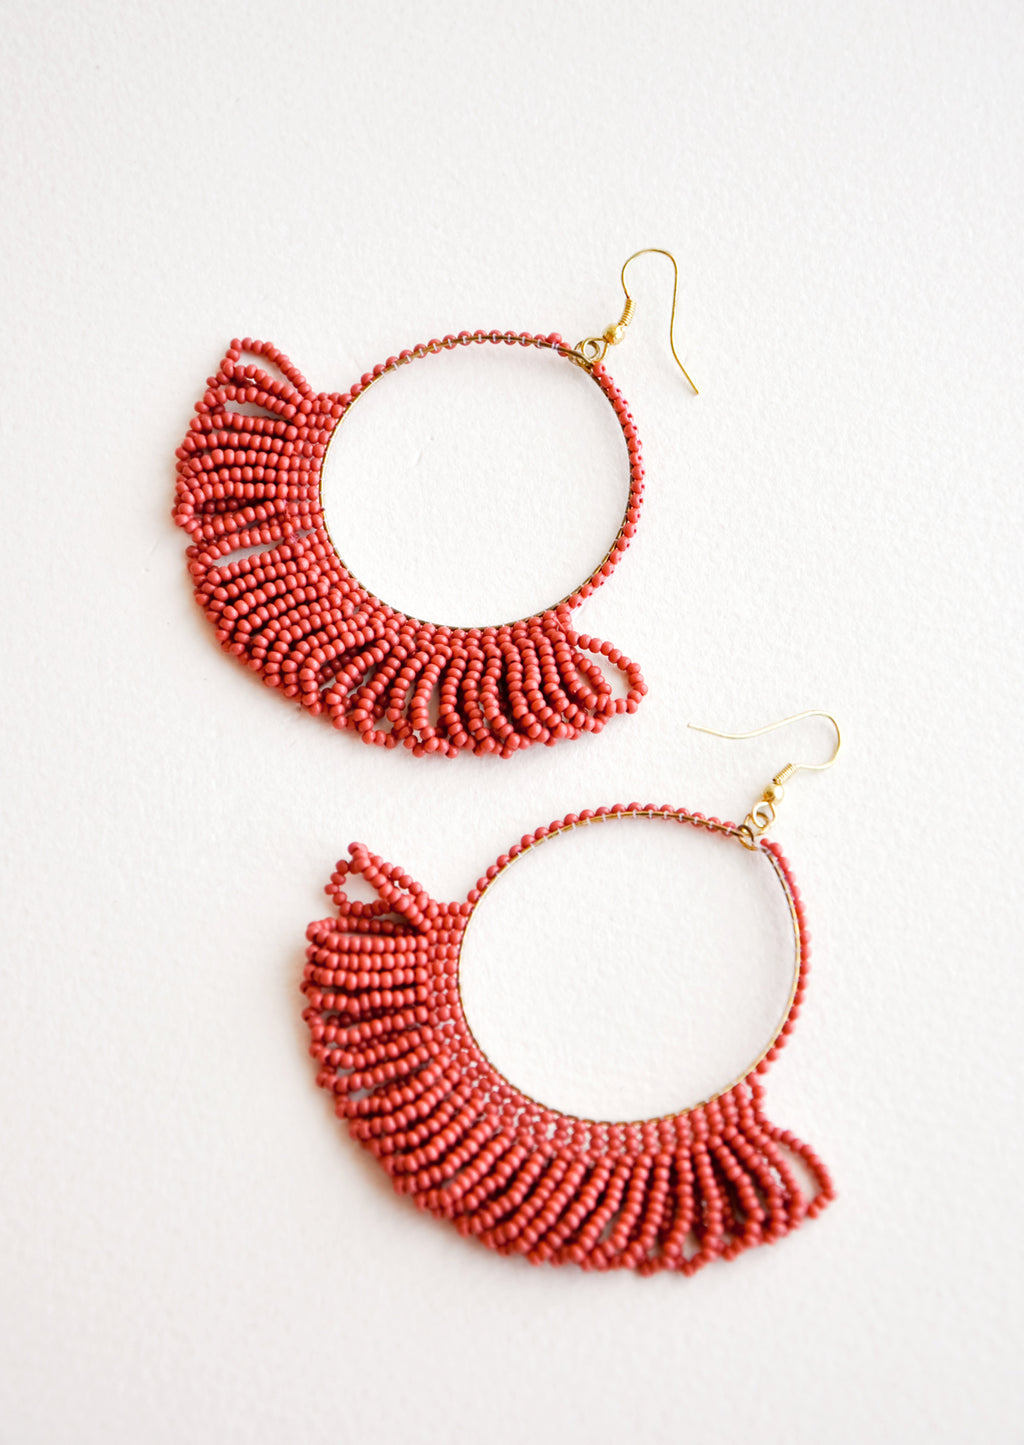 Brick [$24.99]: Dangling hoop earrings featuring dark red beads and accented with hanging beaded, looped fringe.